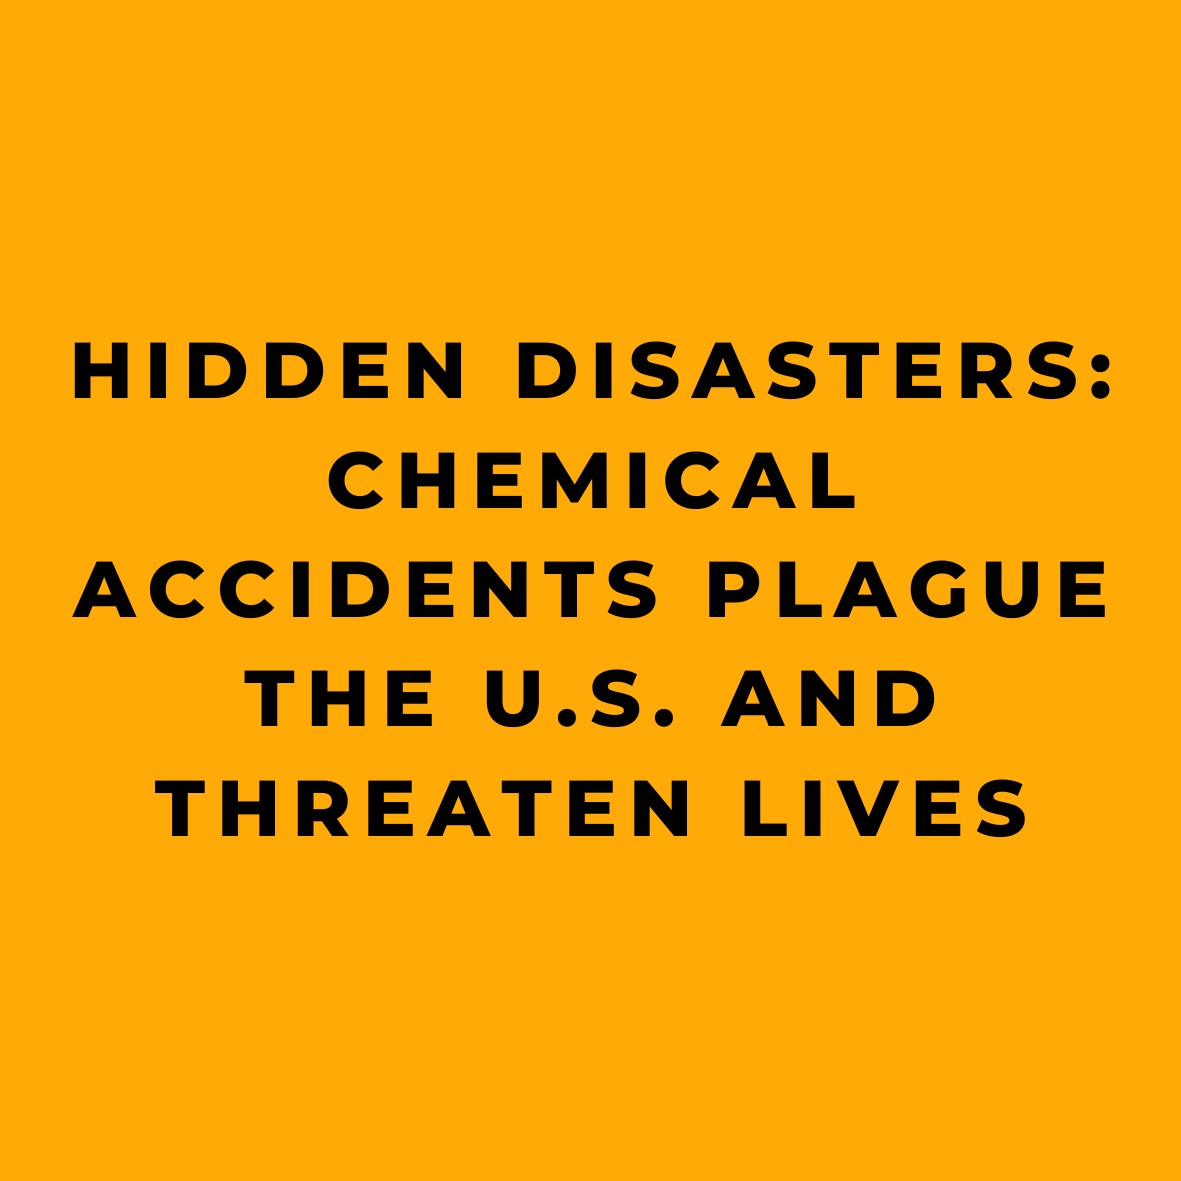 Hidden Disasters Chemical Accidents Plague the U.S. and Threaten Lives